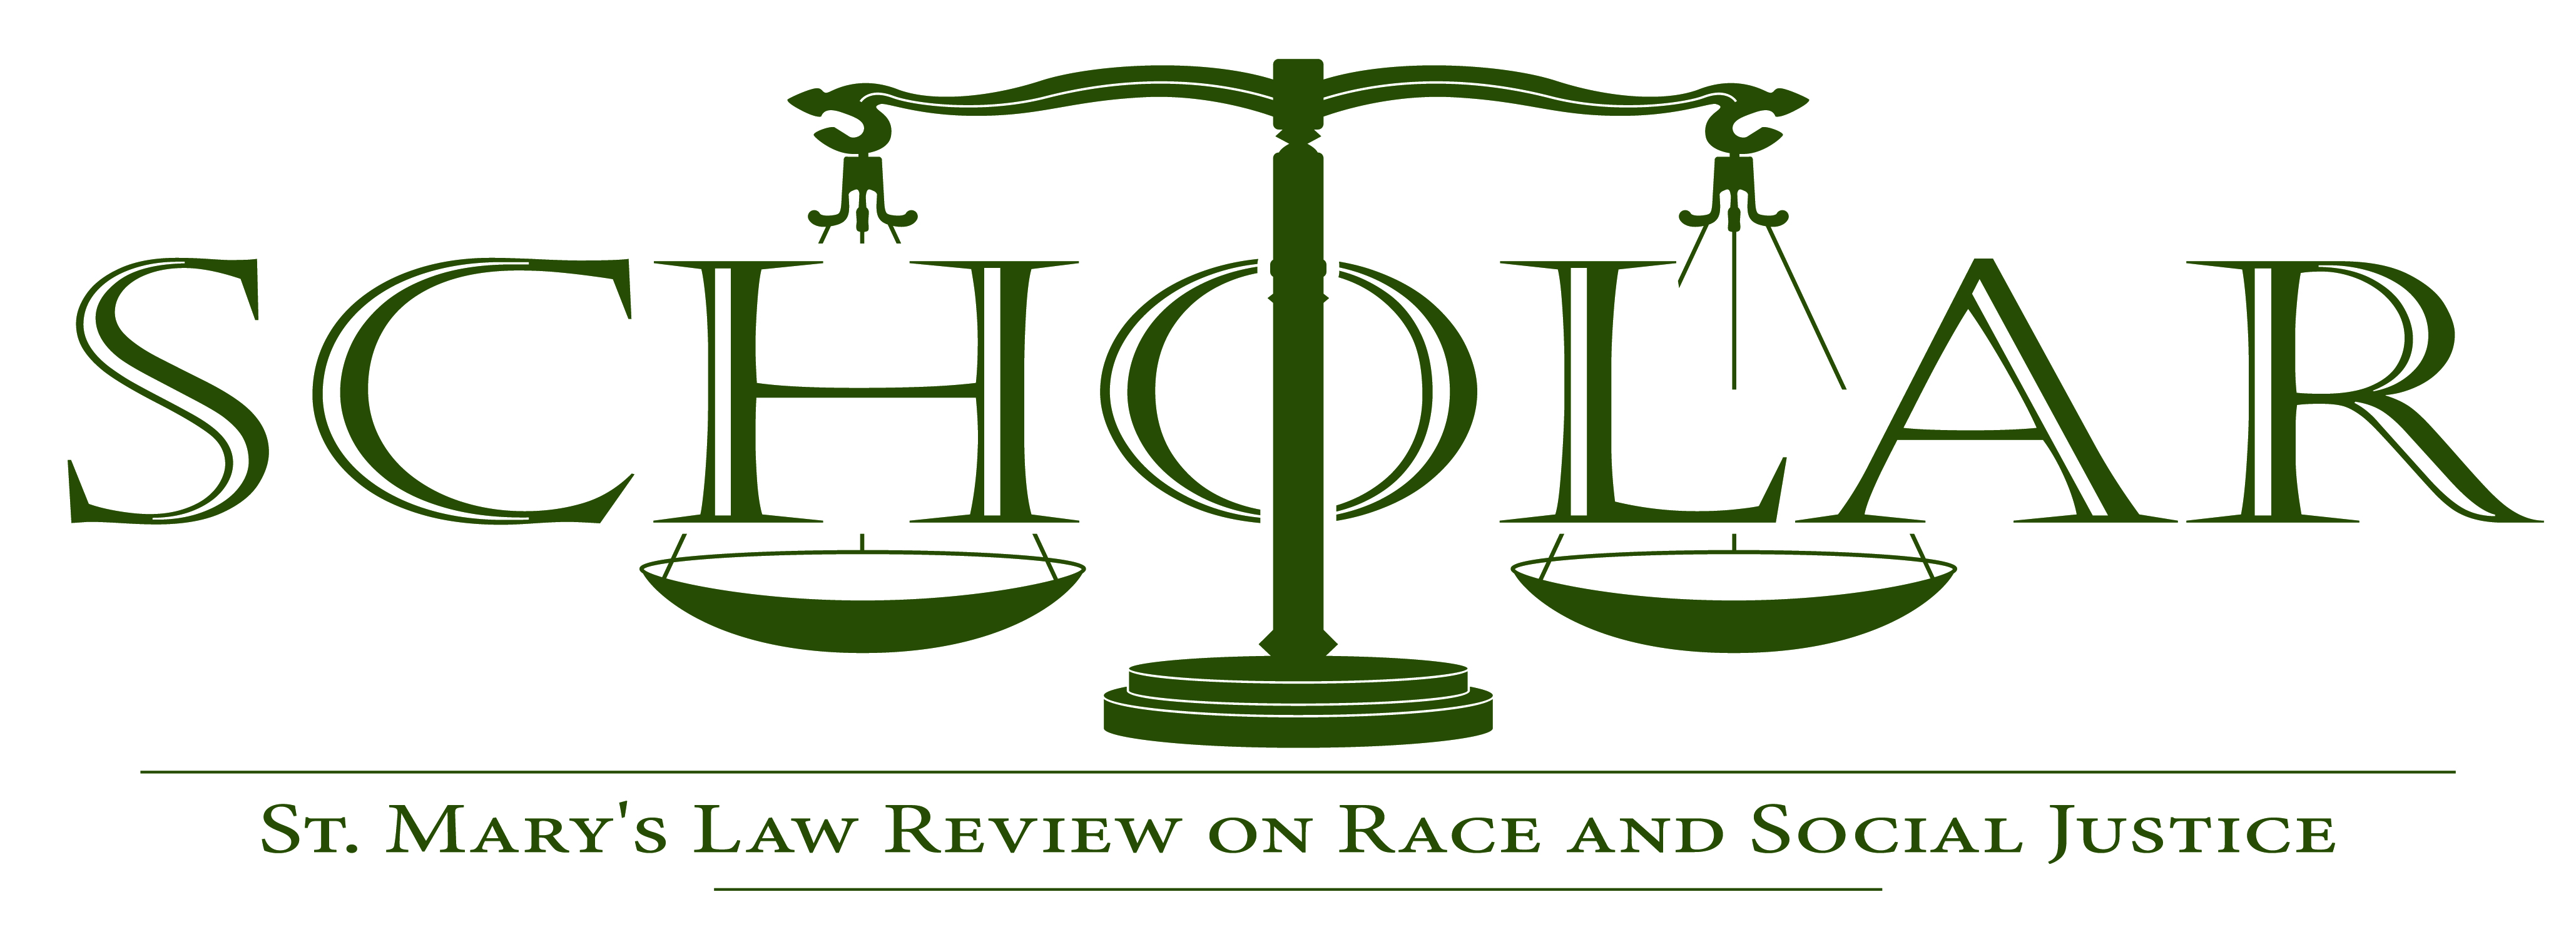 The Scholar: St. Mary's Law Review on Race and Social Justice